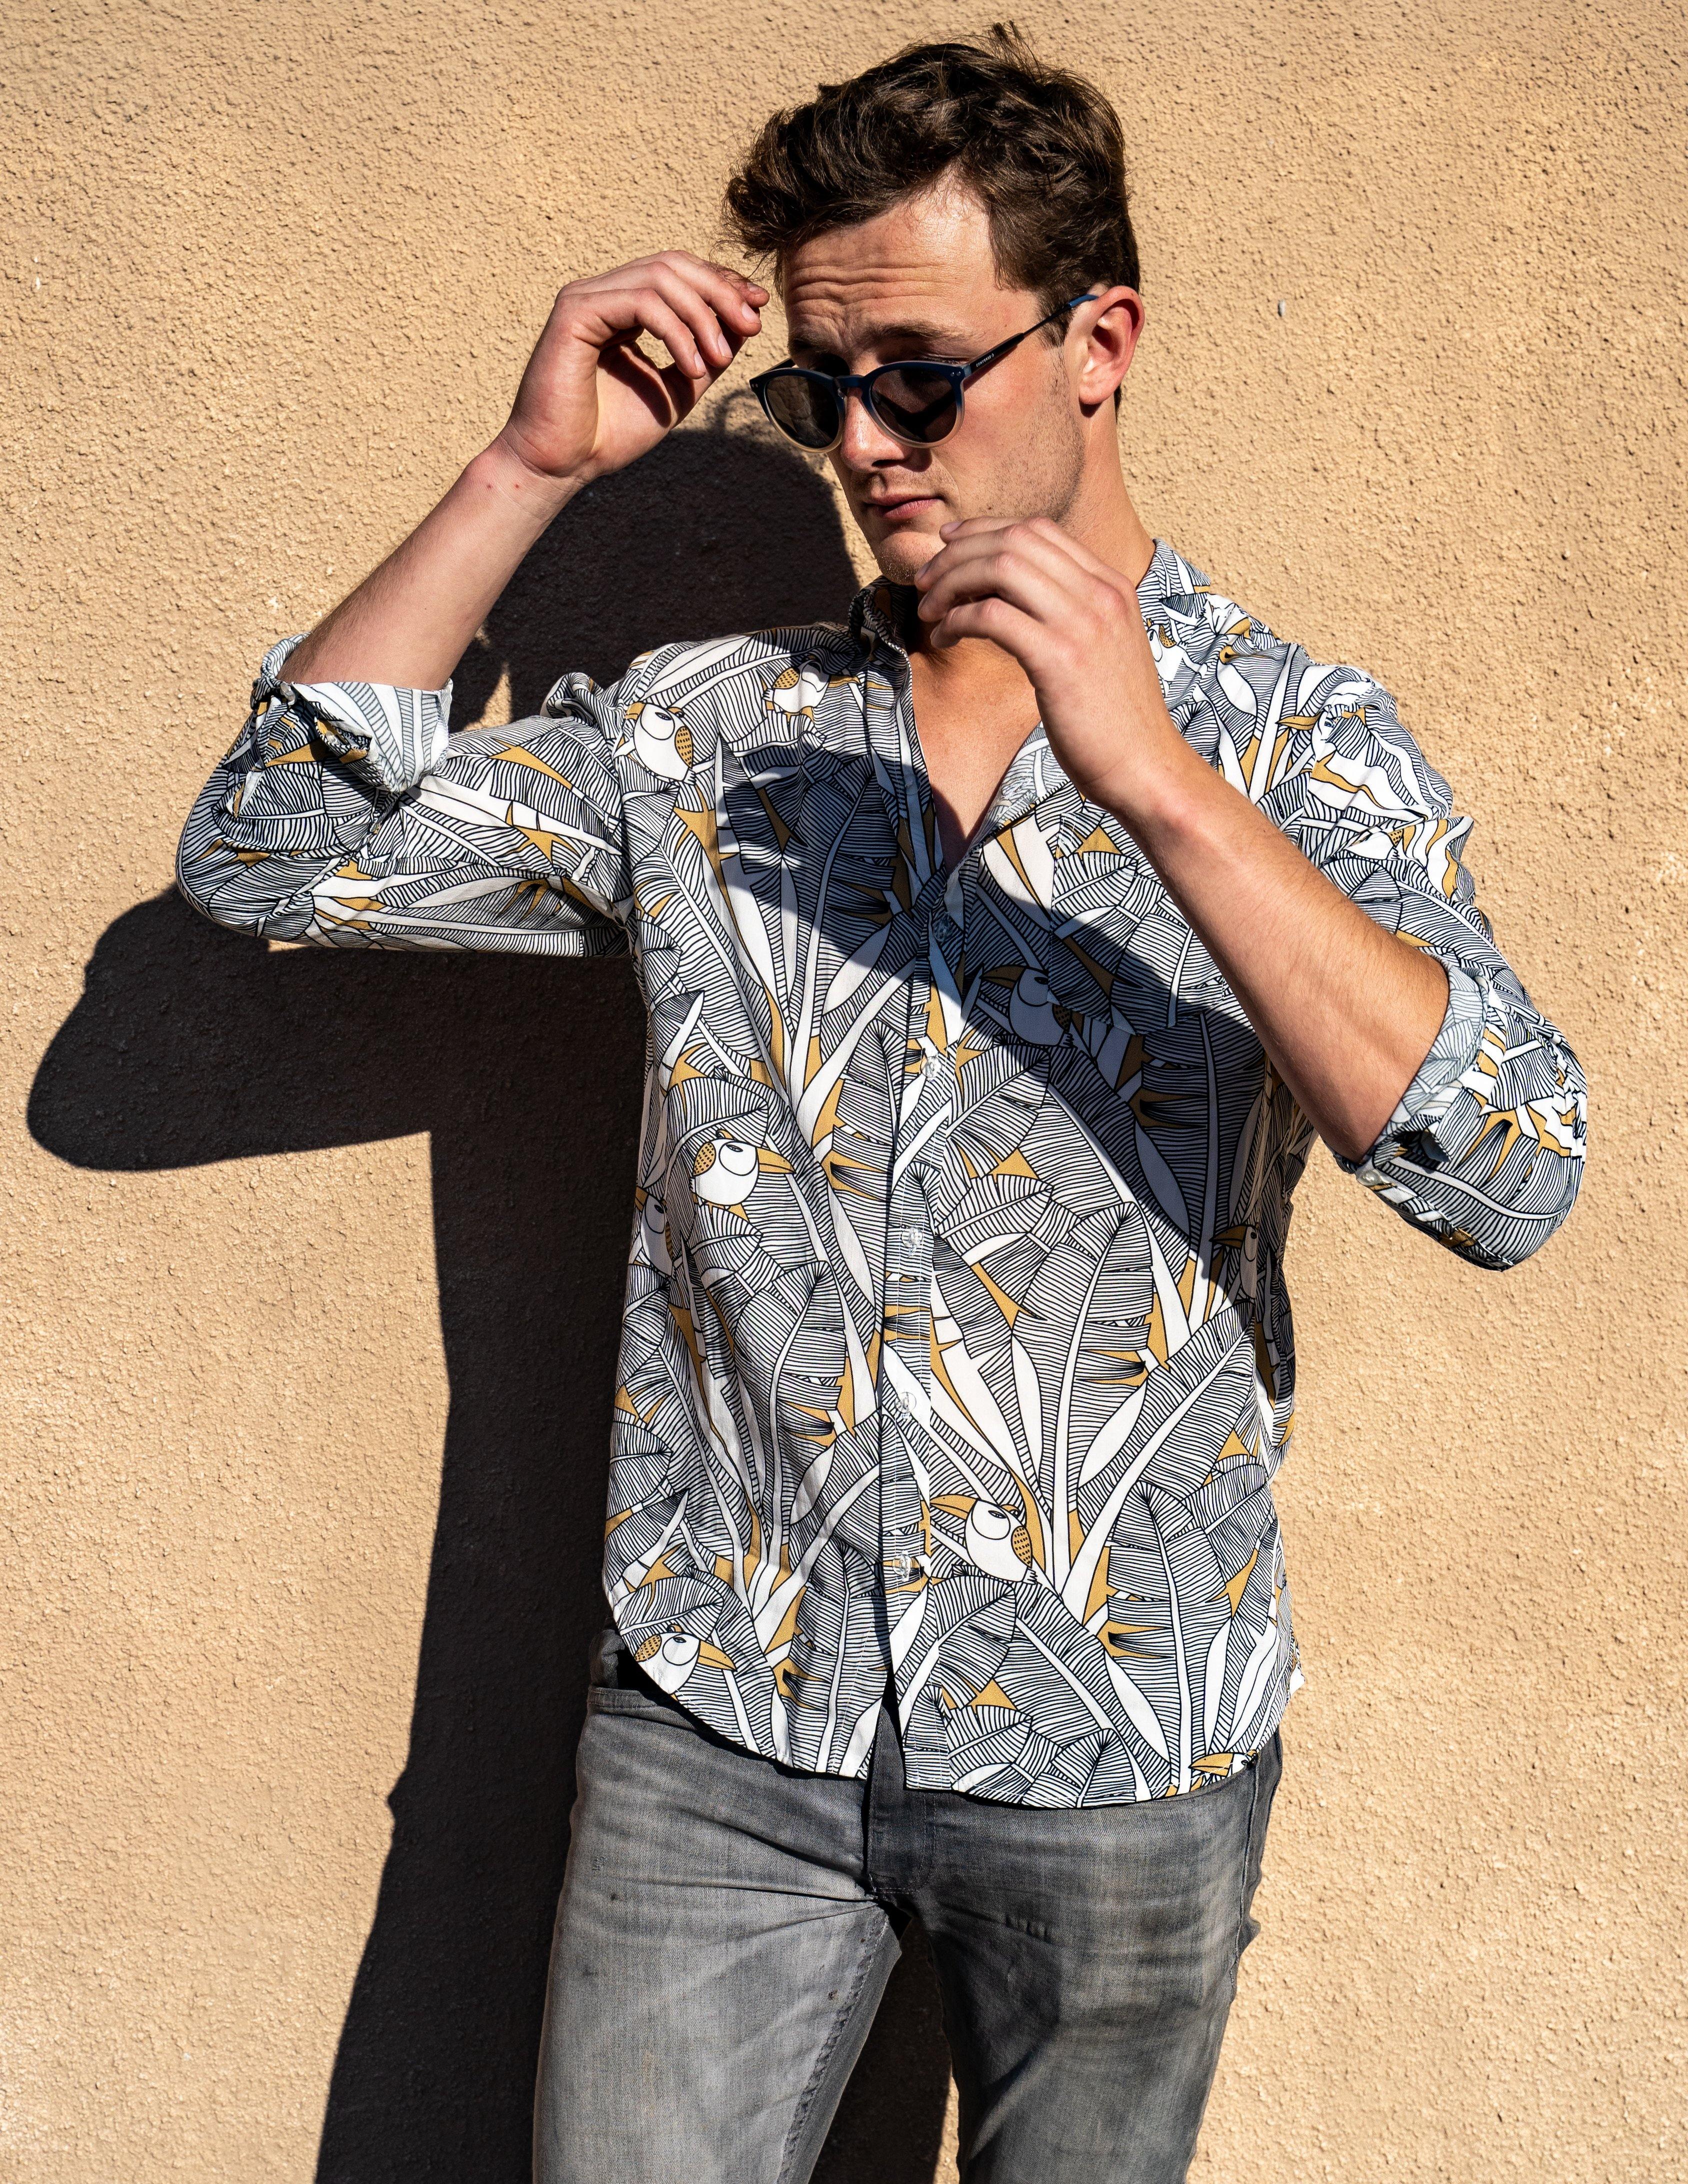 Long Sleeve Shirt - BirdStrange ParadiseStrange Paradise
Men's Long Sleeve Shirt - Bird Of Paradise is a slim fit shirt with button up fastening and a single chest pocket. The shirt showcases a smart casual look and is paMen's Long Sleeve Shirt - Bird Of Paradise